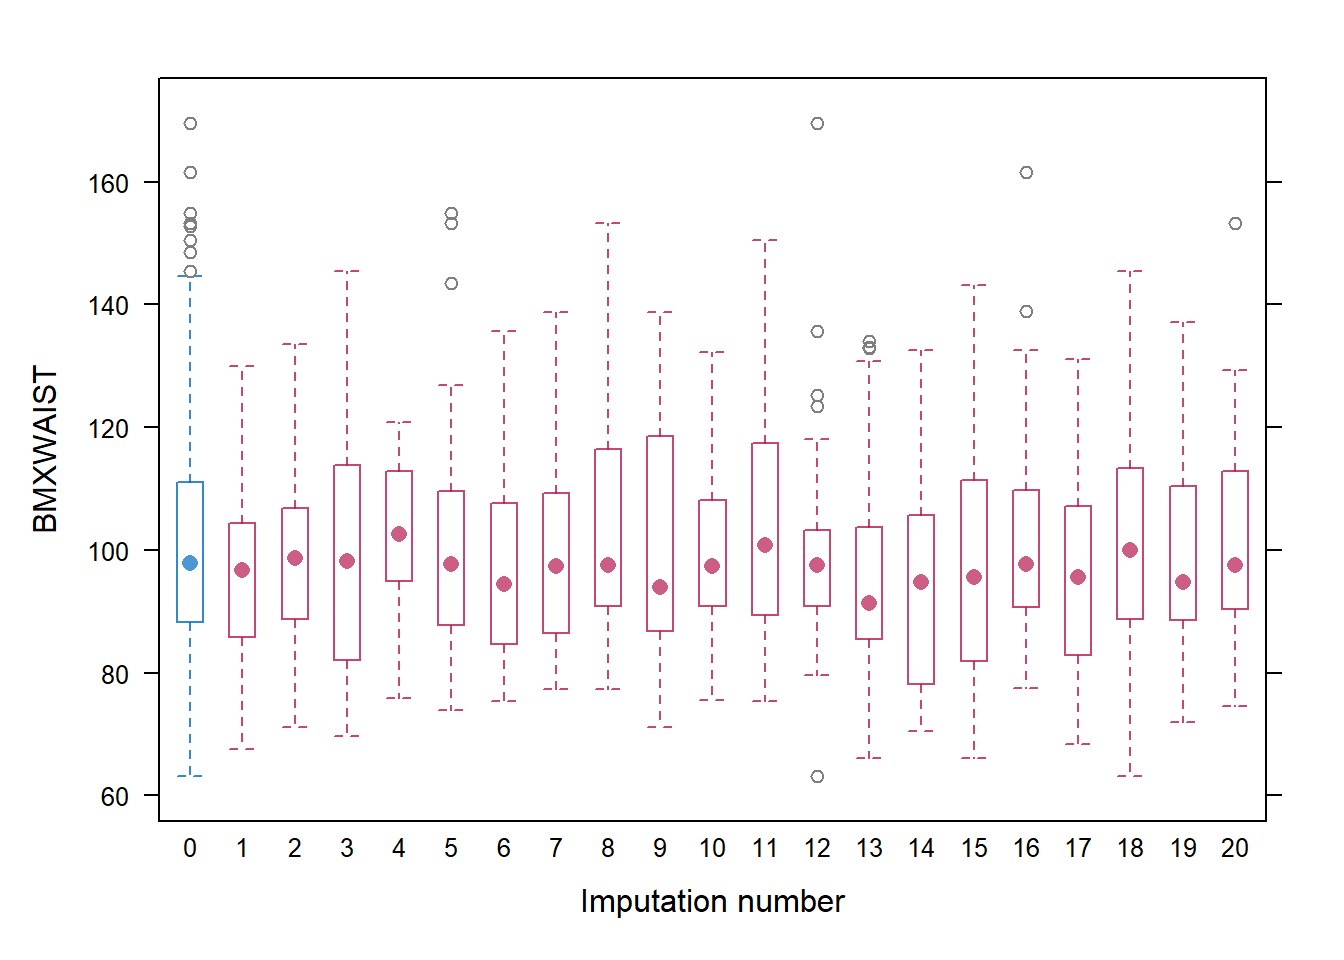 Boxplots of observed and imputed values, by imputation